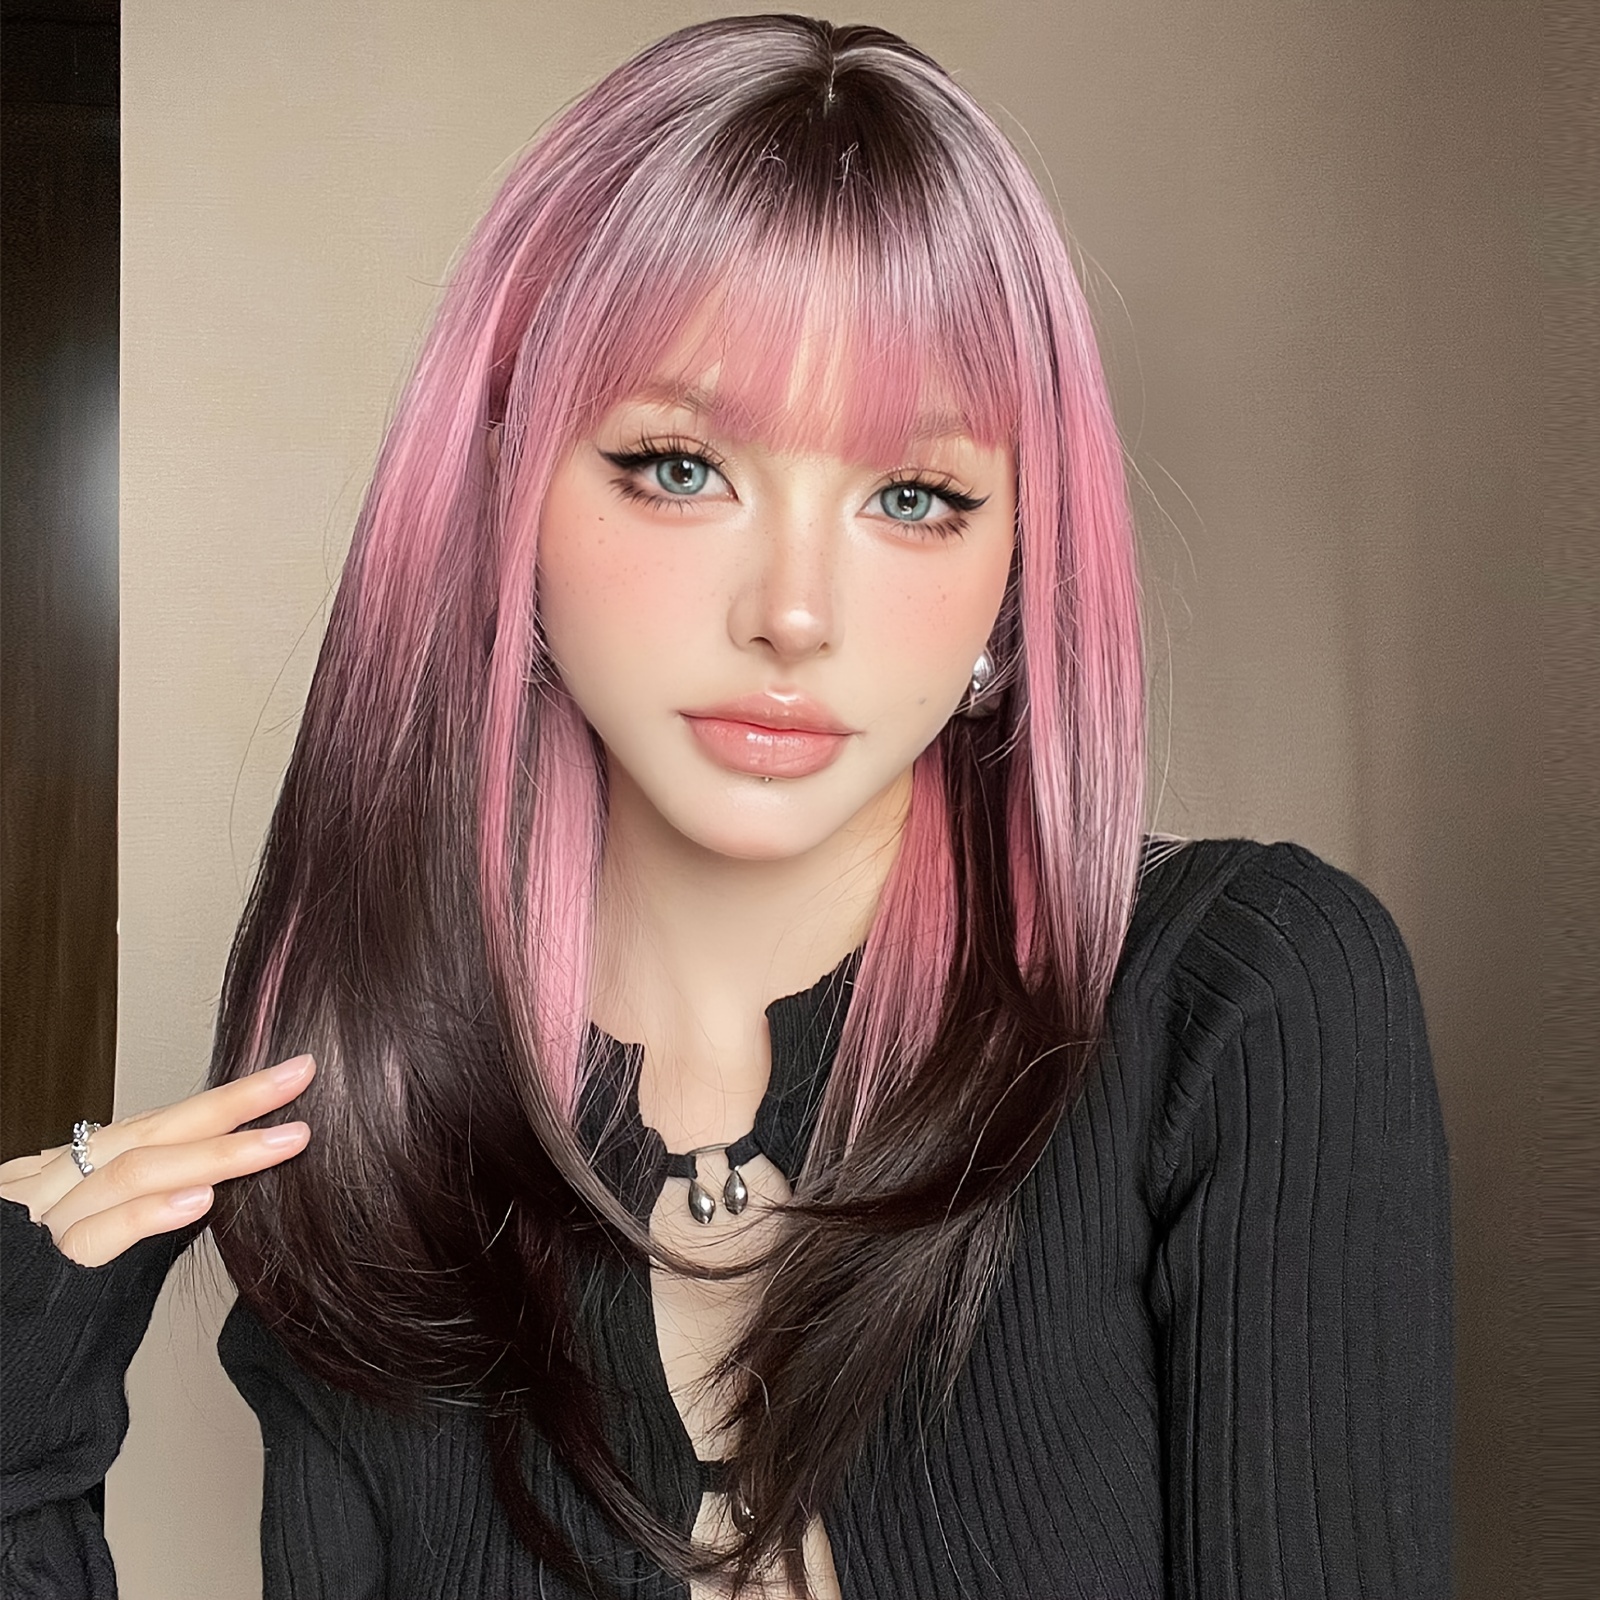 

Chic 22" Pink Ombre To Black Long Straight Wig With Bangs For Women - Heat Resistant Synthetic Hair, Perfect For Daily Wear, Parties & Cosplay